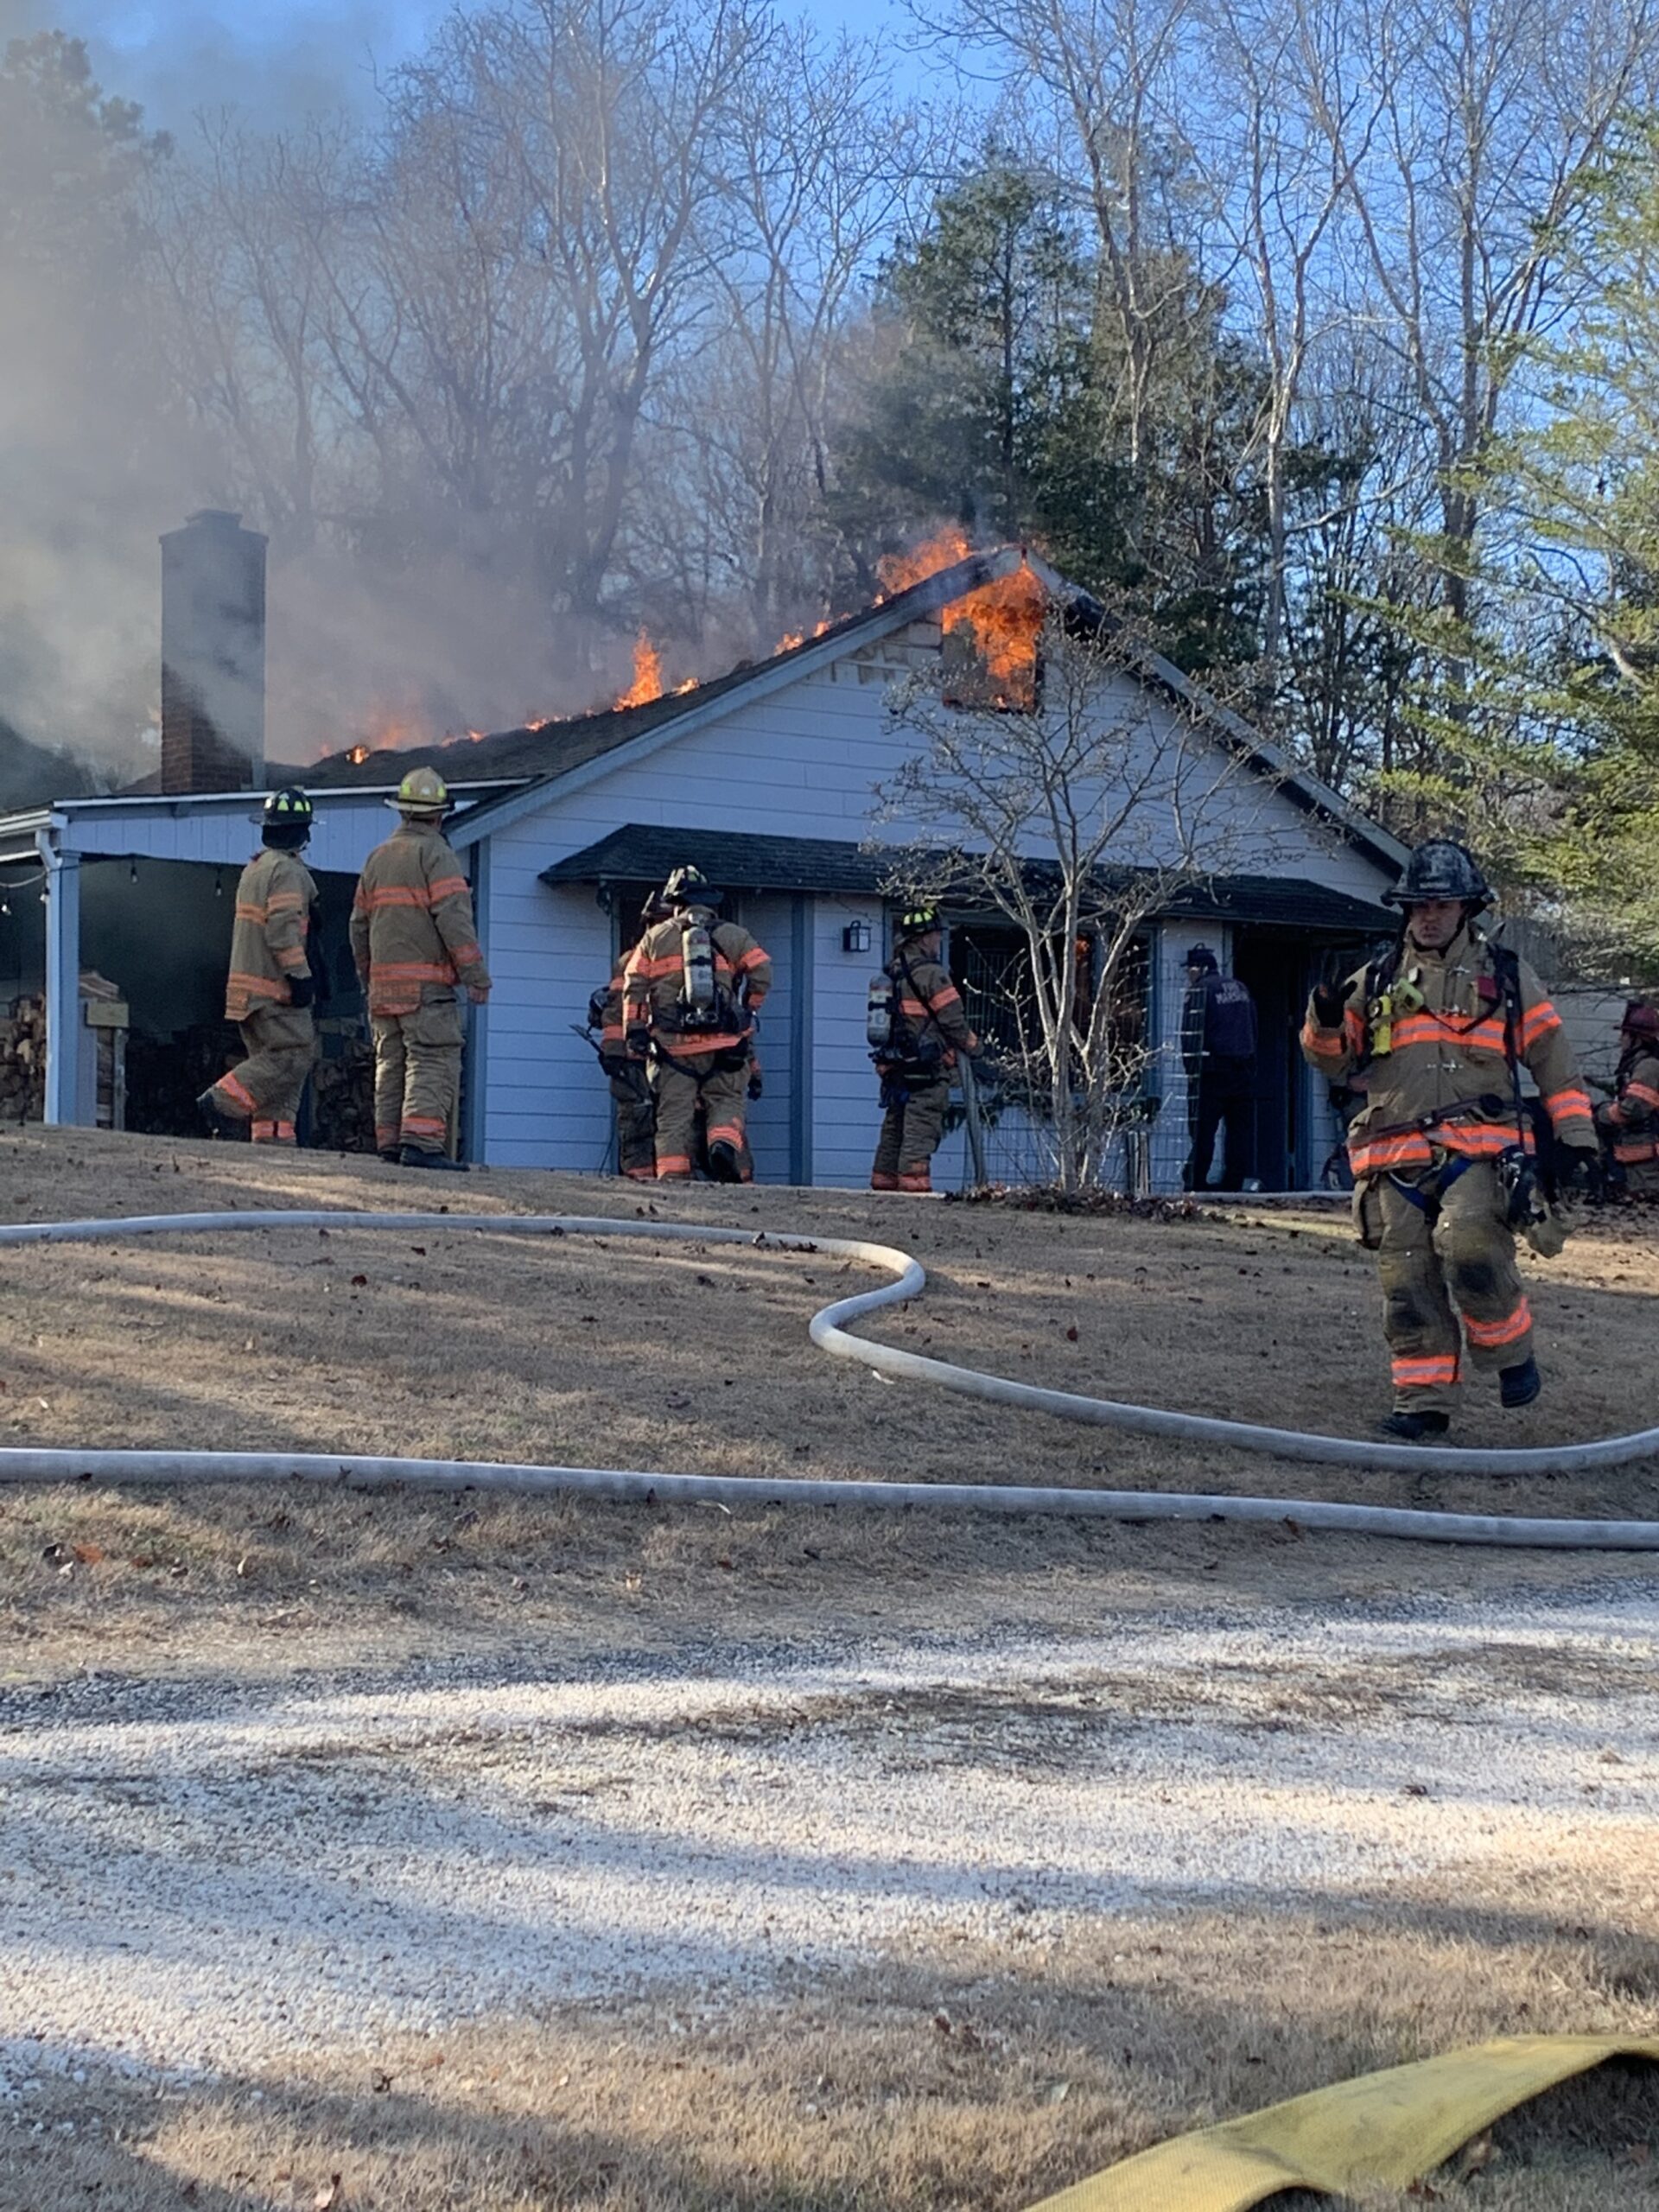 Firefighters respond to a structure fire on County Road 38 in  the Tuckahoe section of Southampton on Tuesday, December 20.   COURTESY SOUTHAMPTON FIRE DEPARTMENT